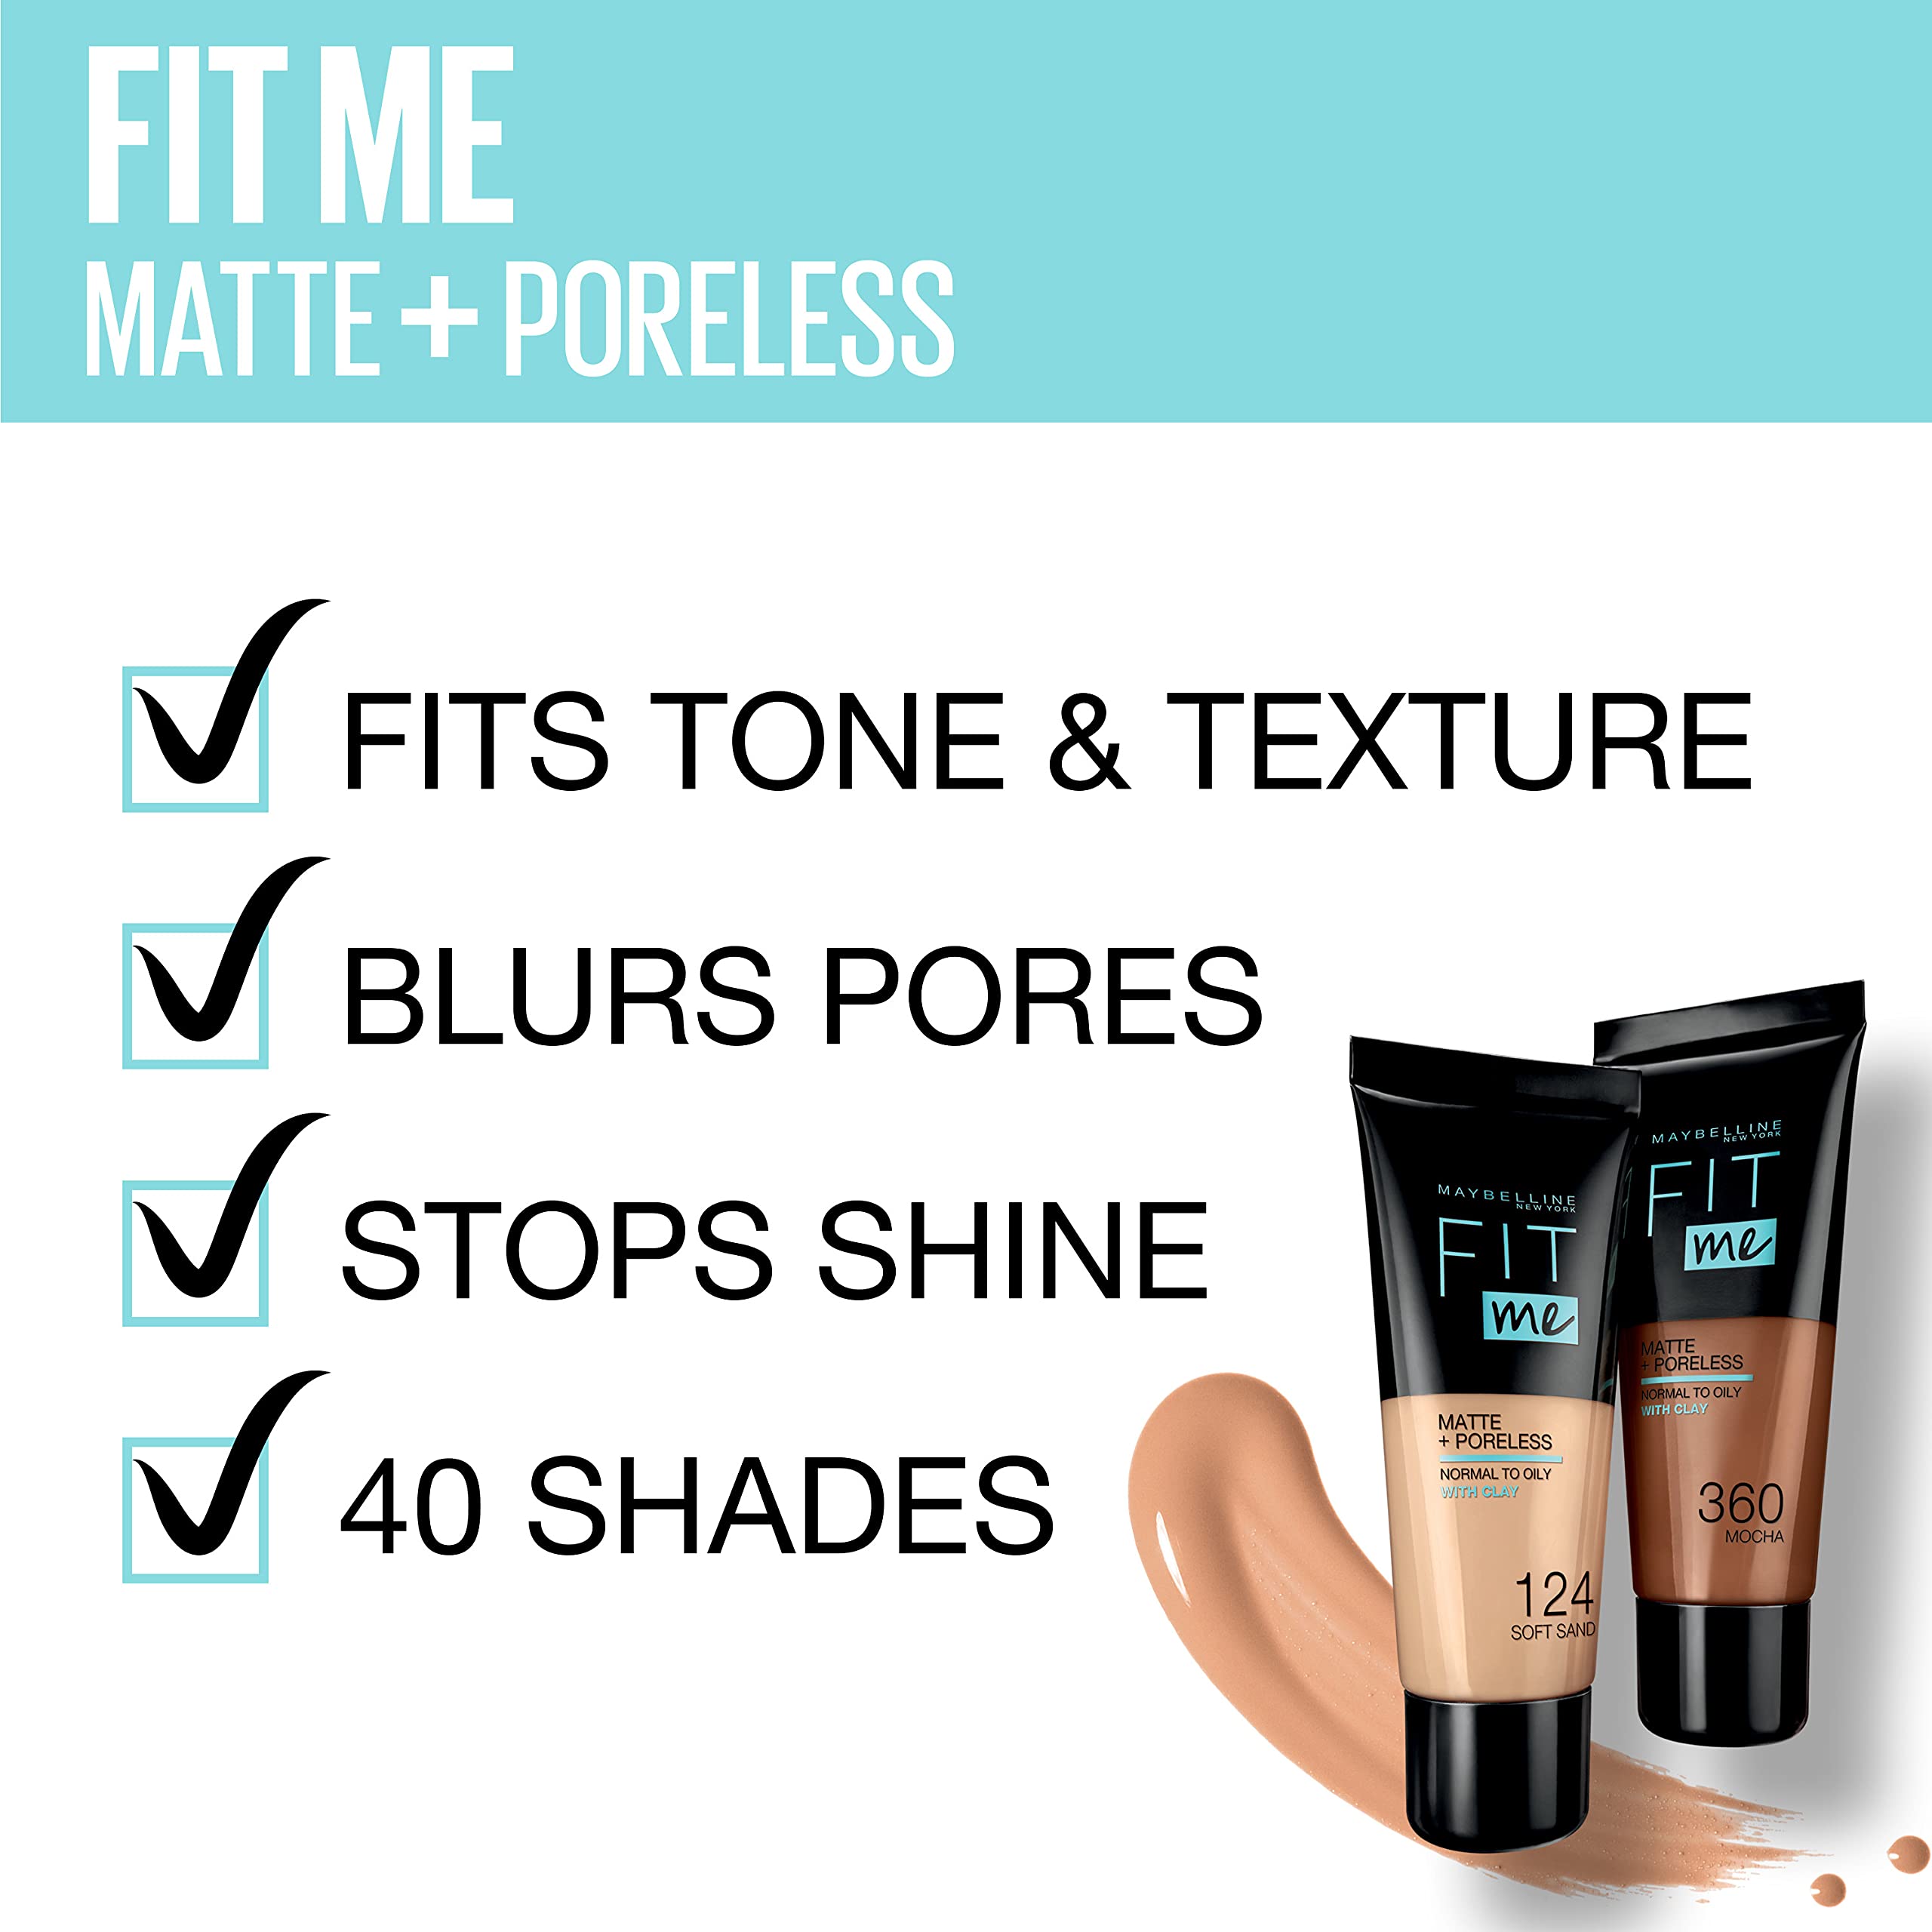 Maybelline New York Fit Me Matte & Poreless Foundation 330 Toffee 30ml